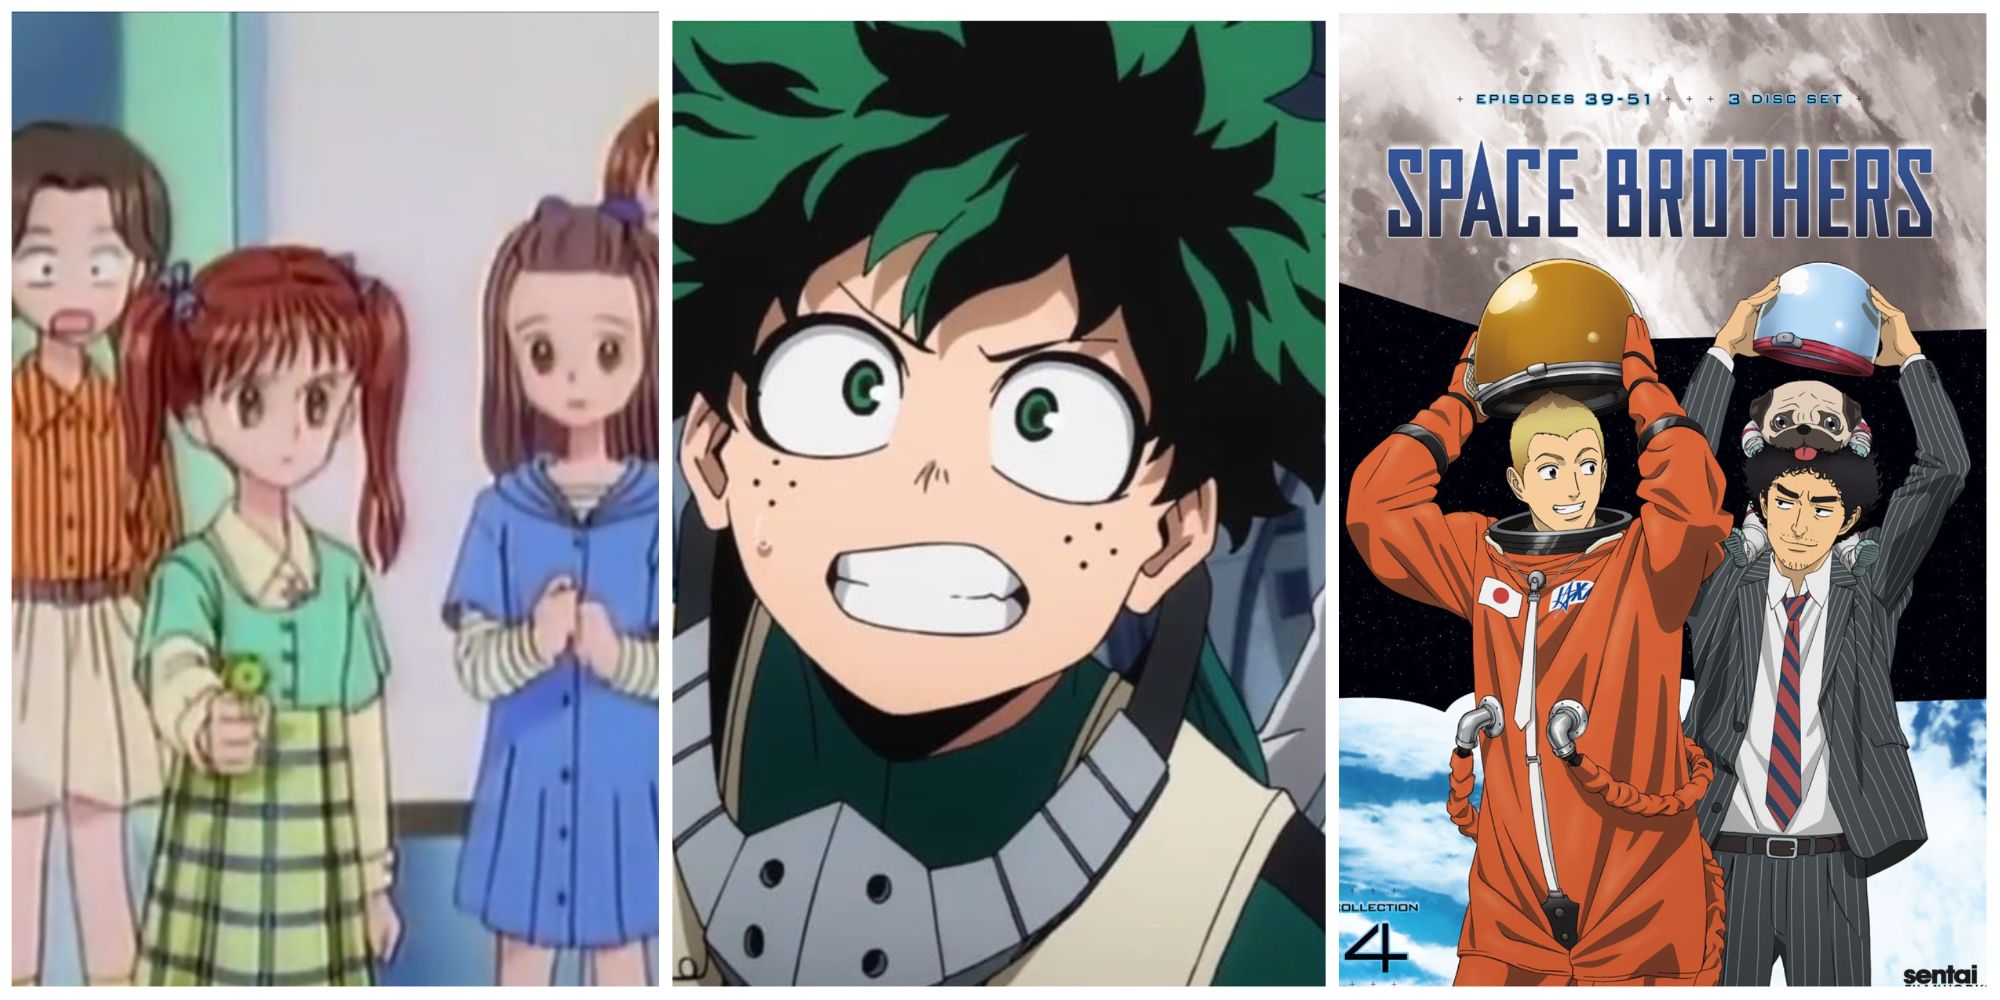 Your Classic Childhood Anime On TV | Which One Do You Remember?